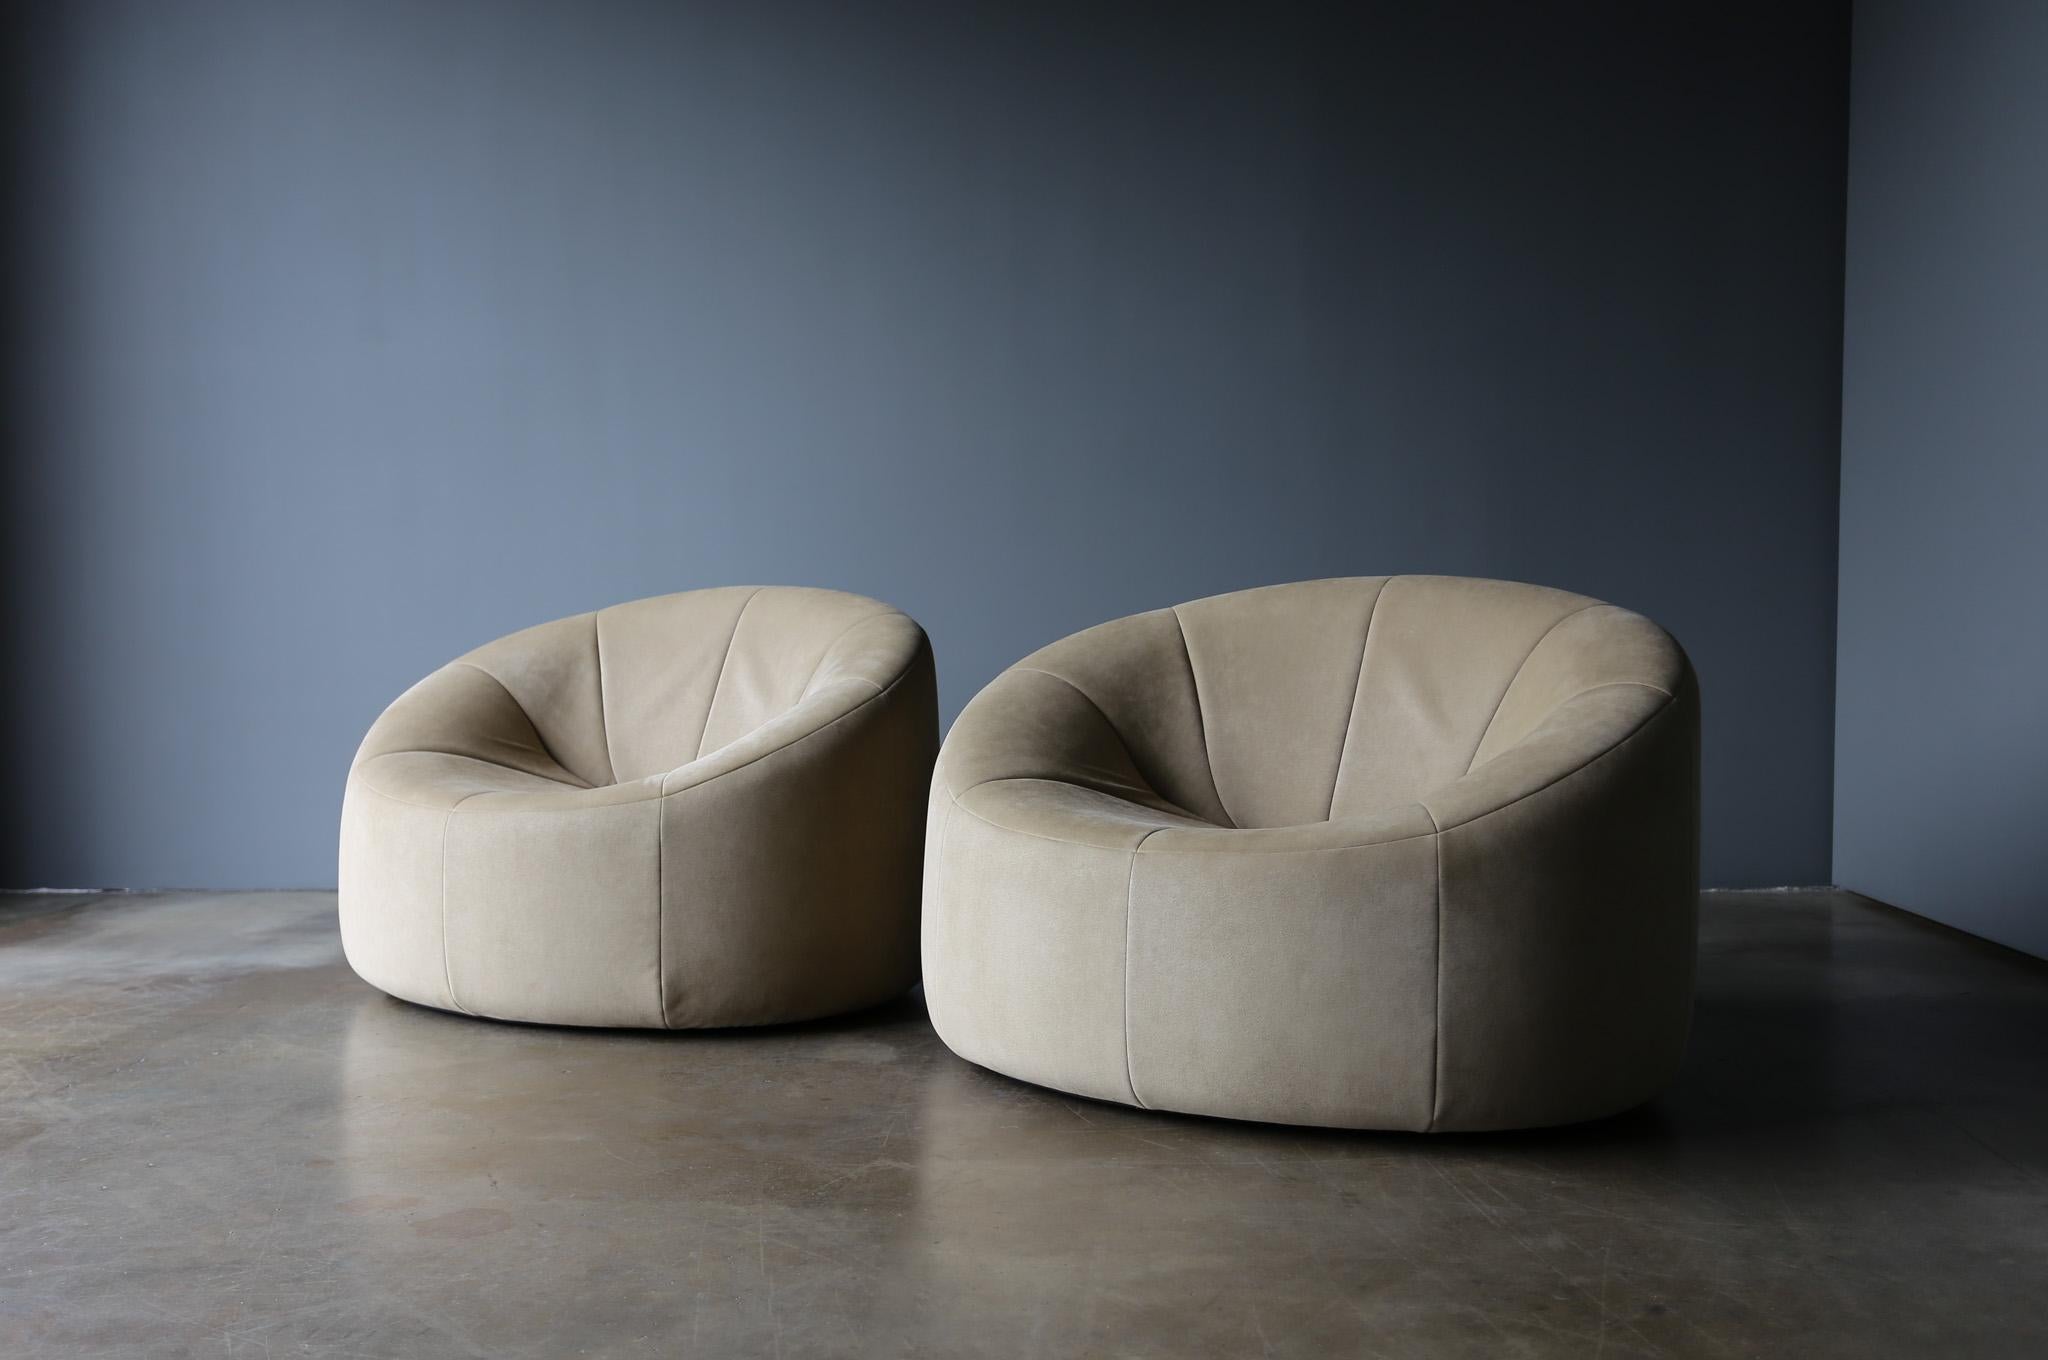 French Pierre Paulin Pumpkin Lounge Chairs for Ligne Roset, France, 2008